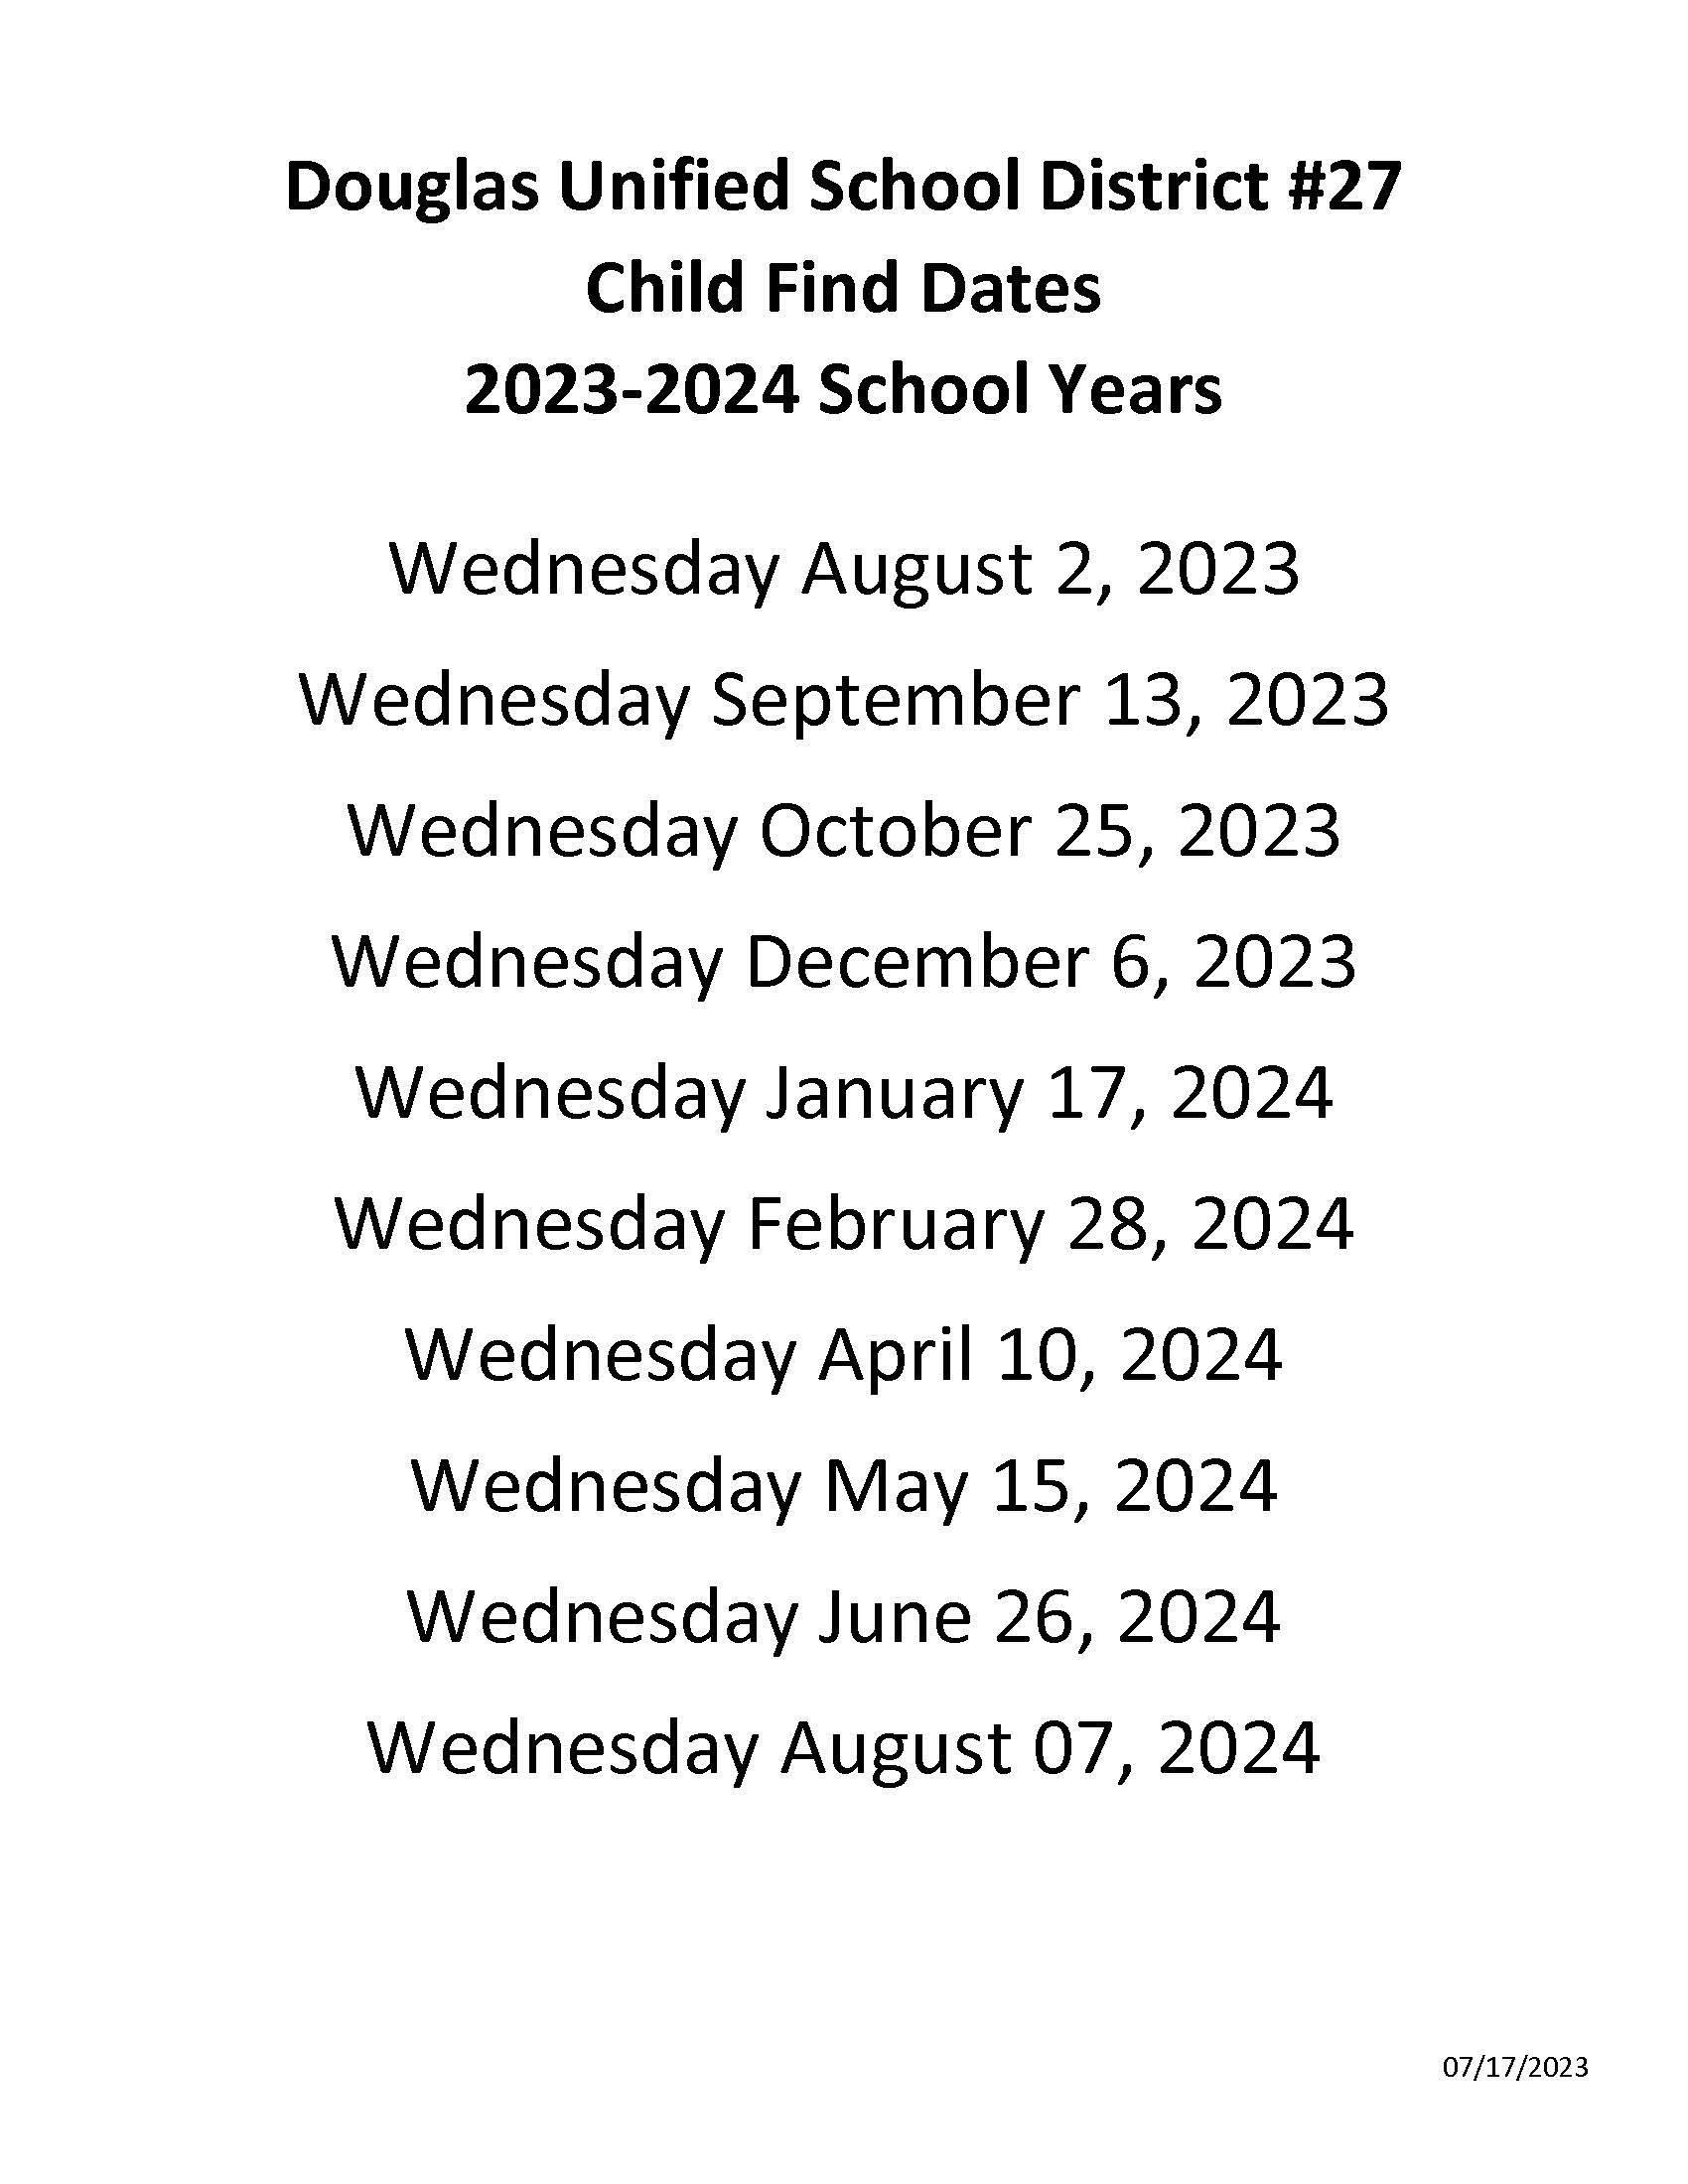 SY 23-24 Child Find Dates